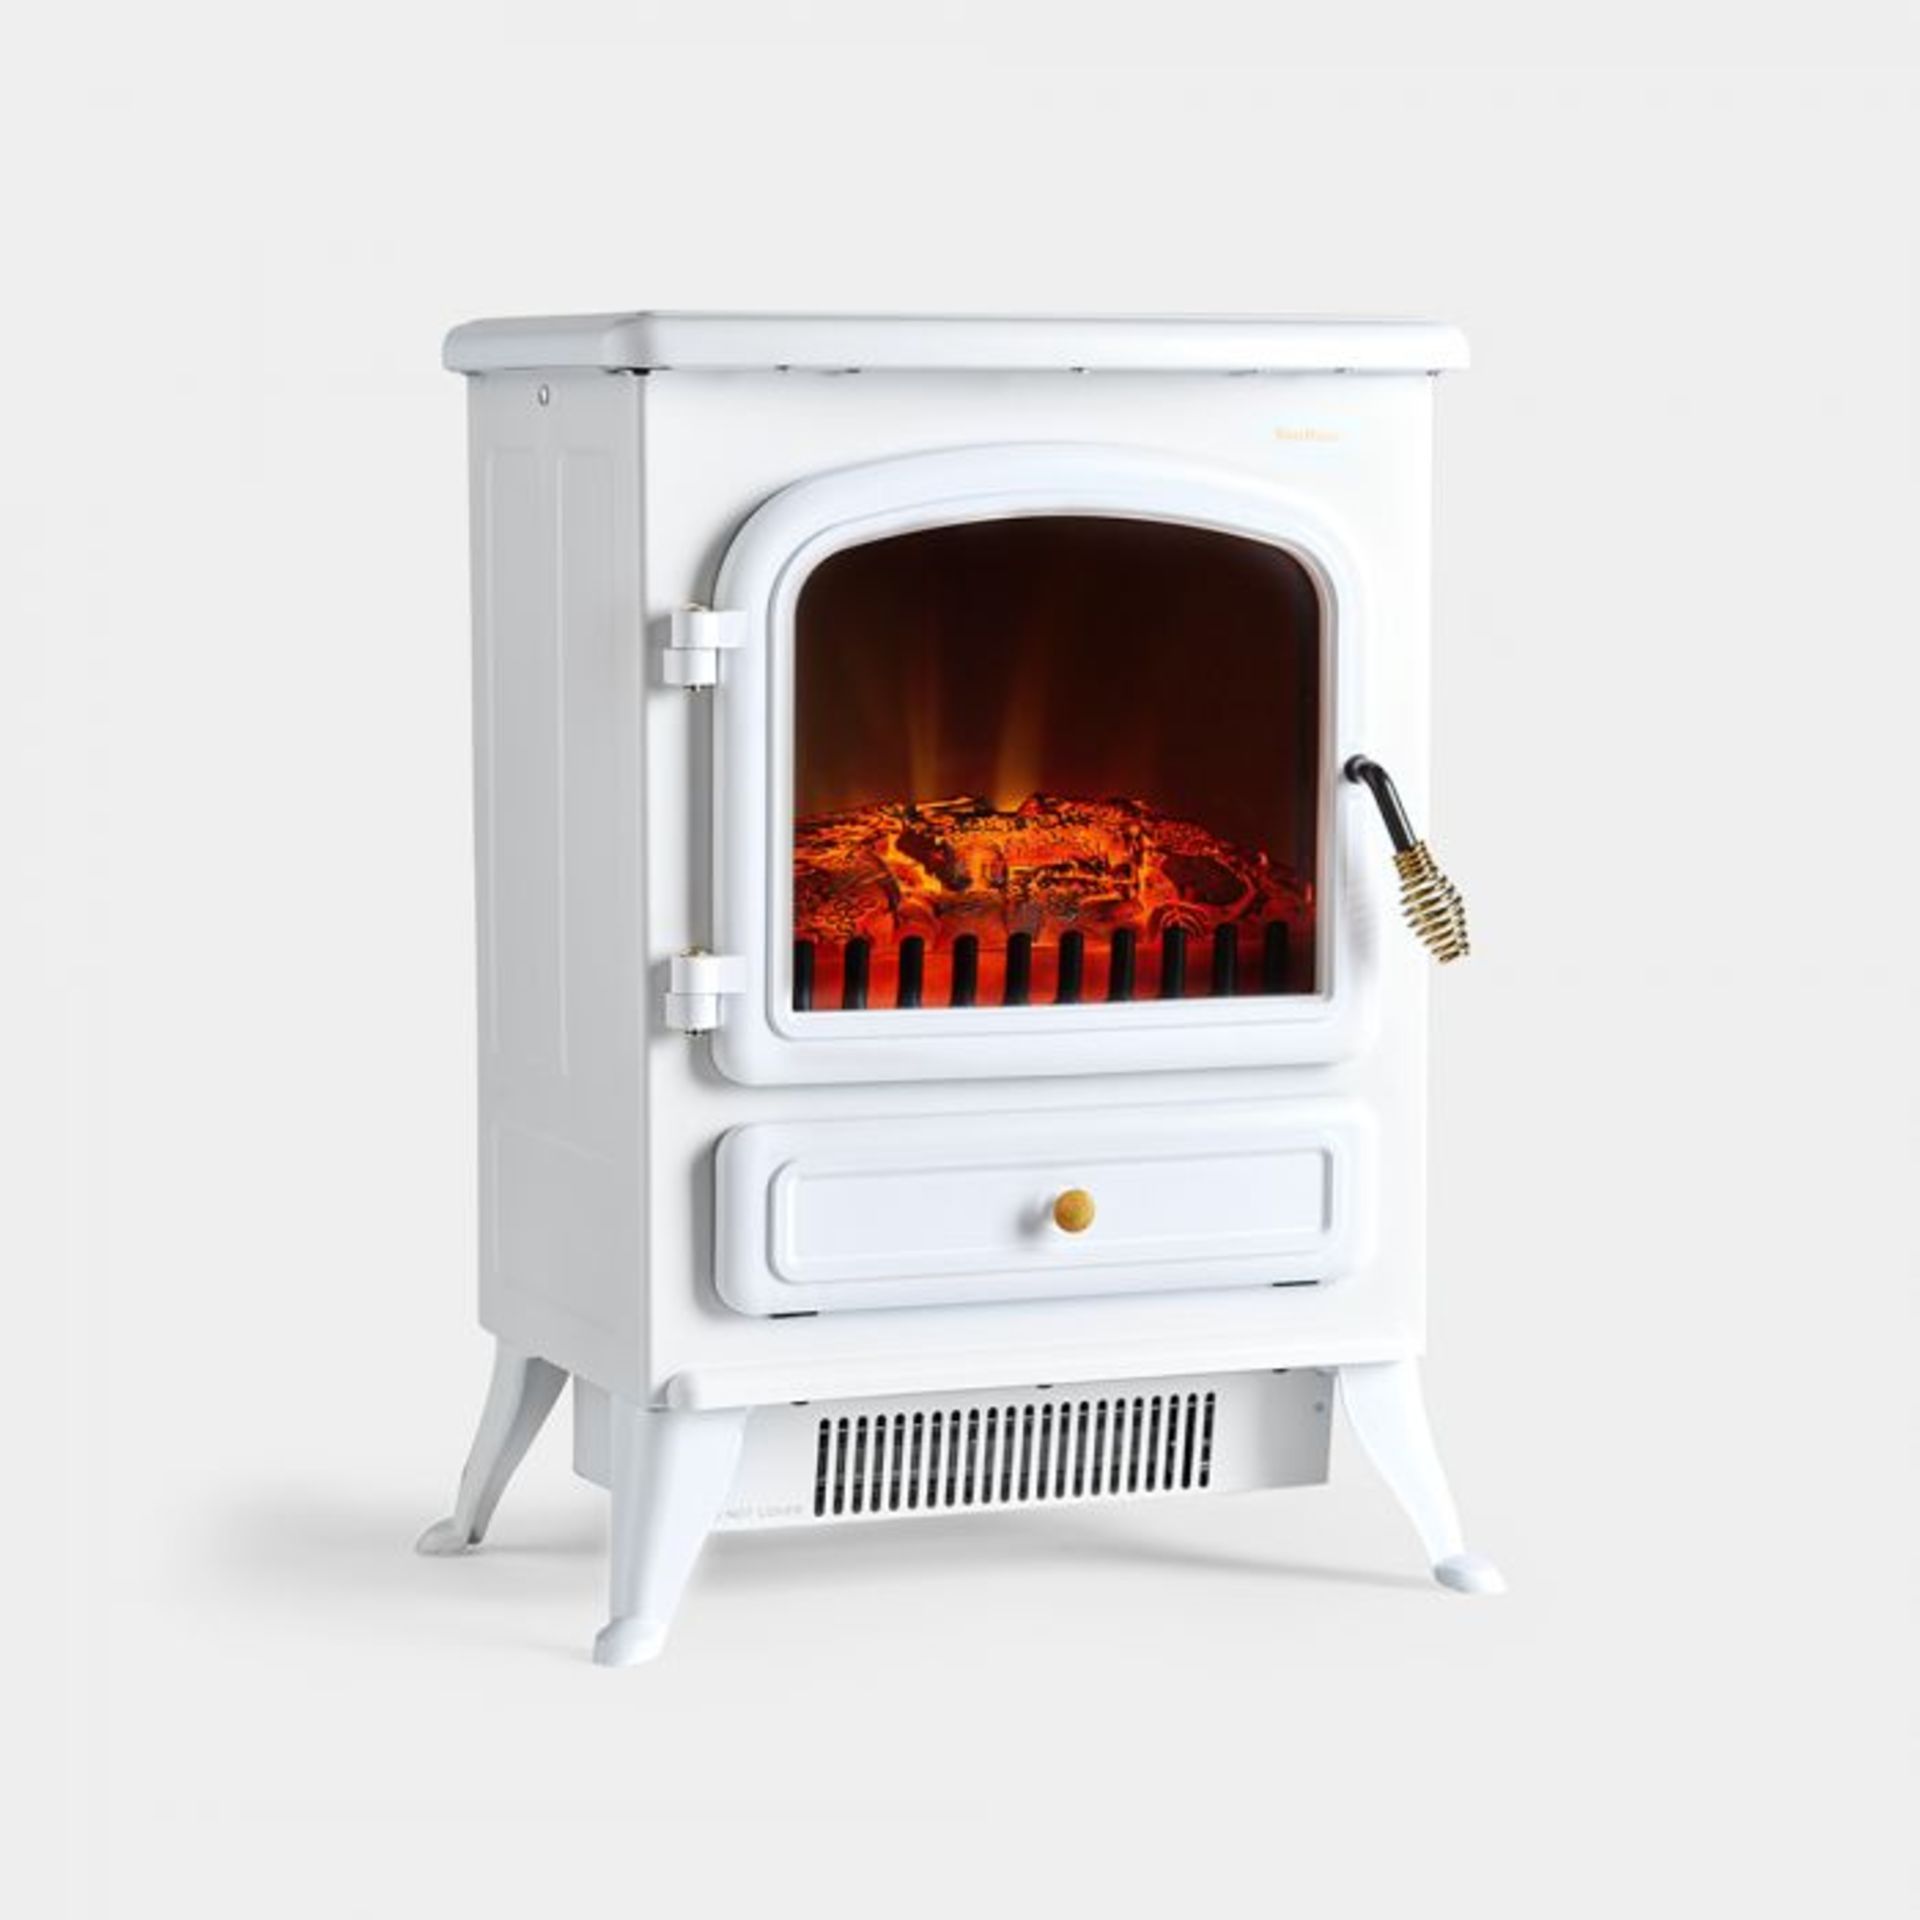 1850W Portable White Stove Heater. he stove heater heats rooms up to 53m² and benefits from 2 heat